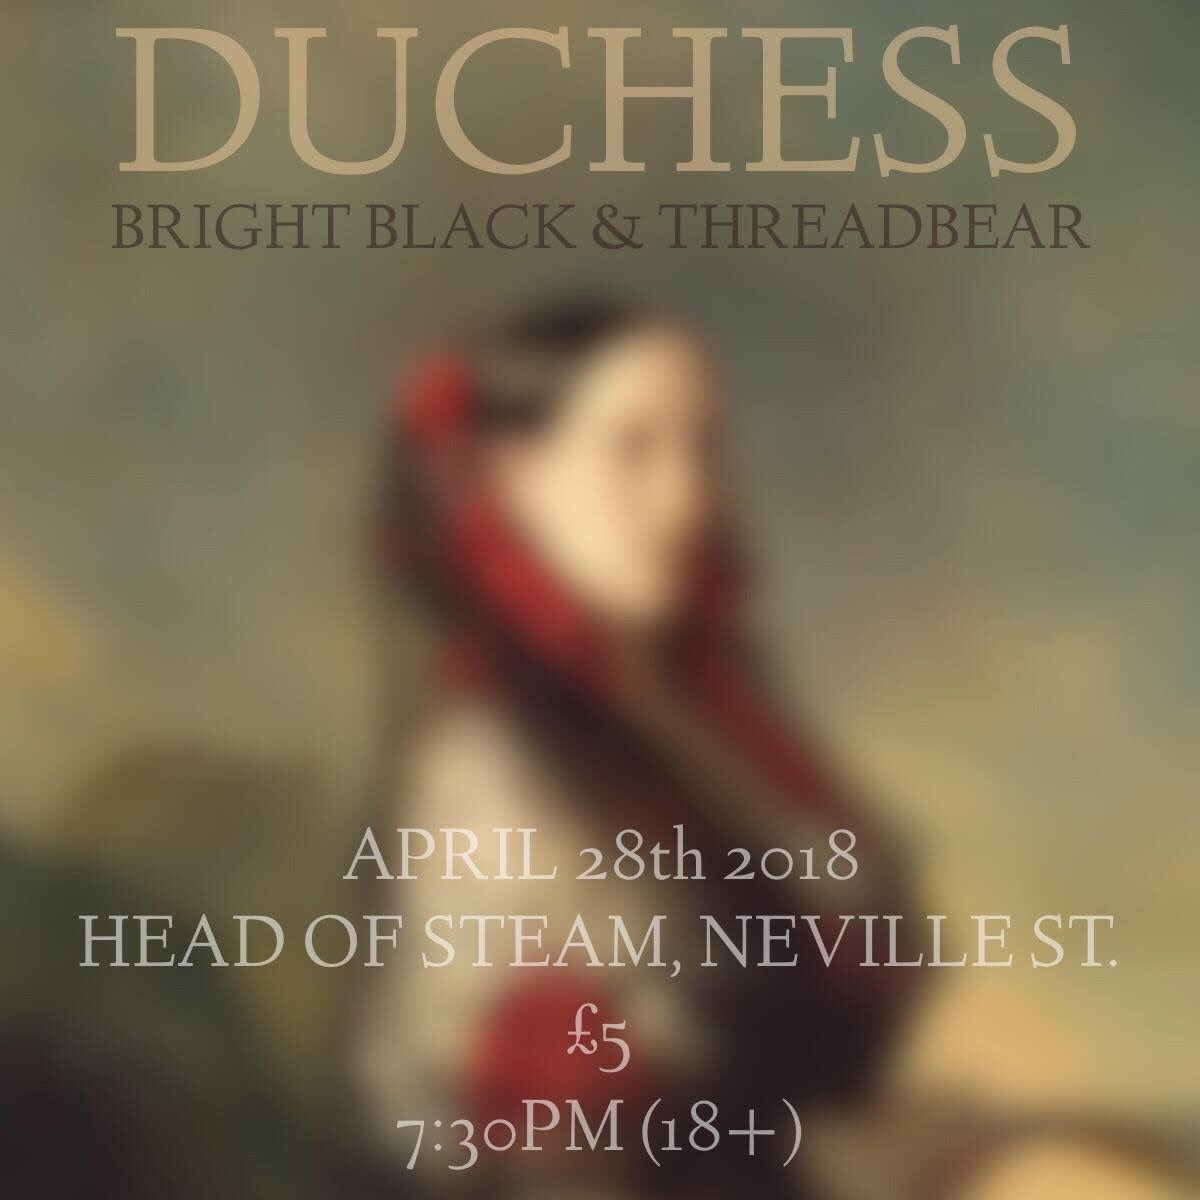 ⬇️ SOON ⬇️
Our good pals @ThreadBearRocks will be opening up the night for us @HOS_Newcastle Saturday 28/4! Do not miss them! 
Check them out: open.spotify.com/album/0KMcZATV…

#Newcastle #Music #NewMusic #NewcastleLiveMusic #MusicRelease #Single #Indie #Rock